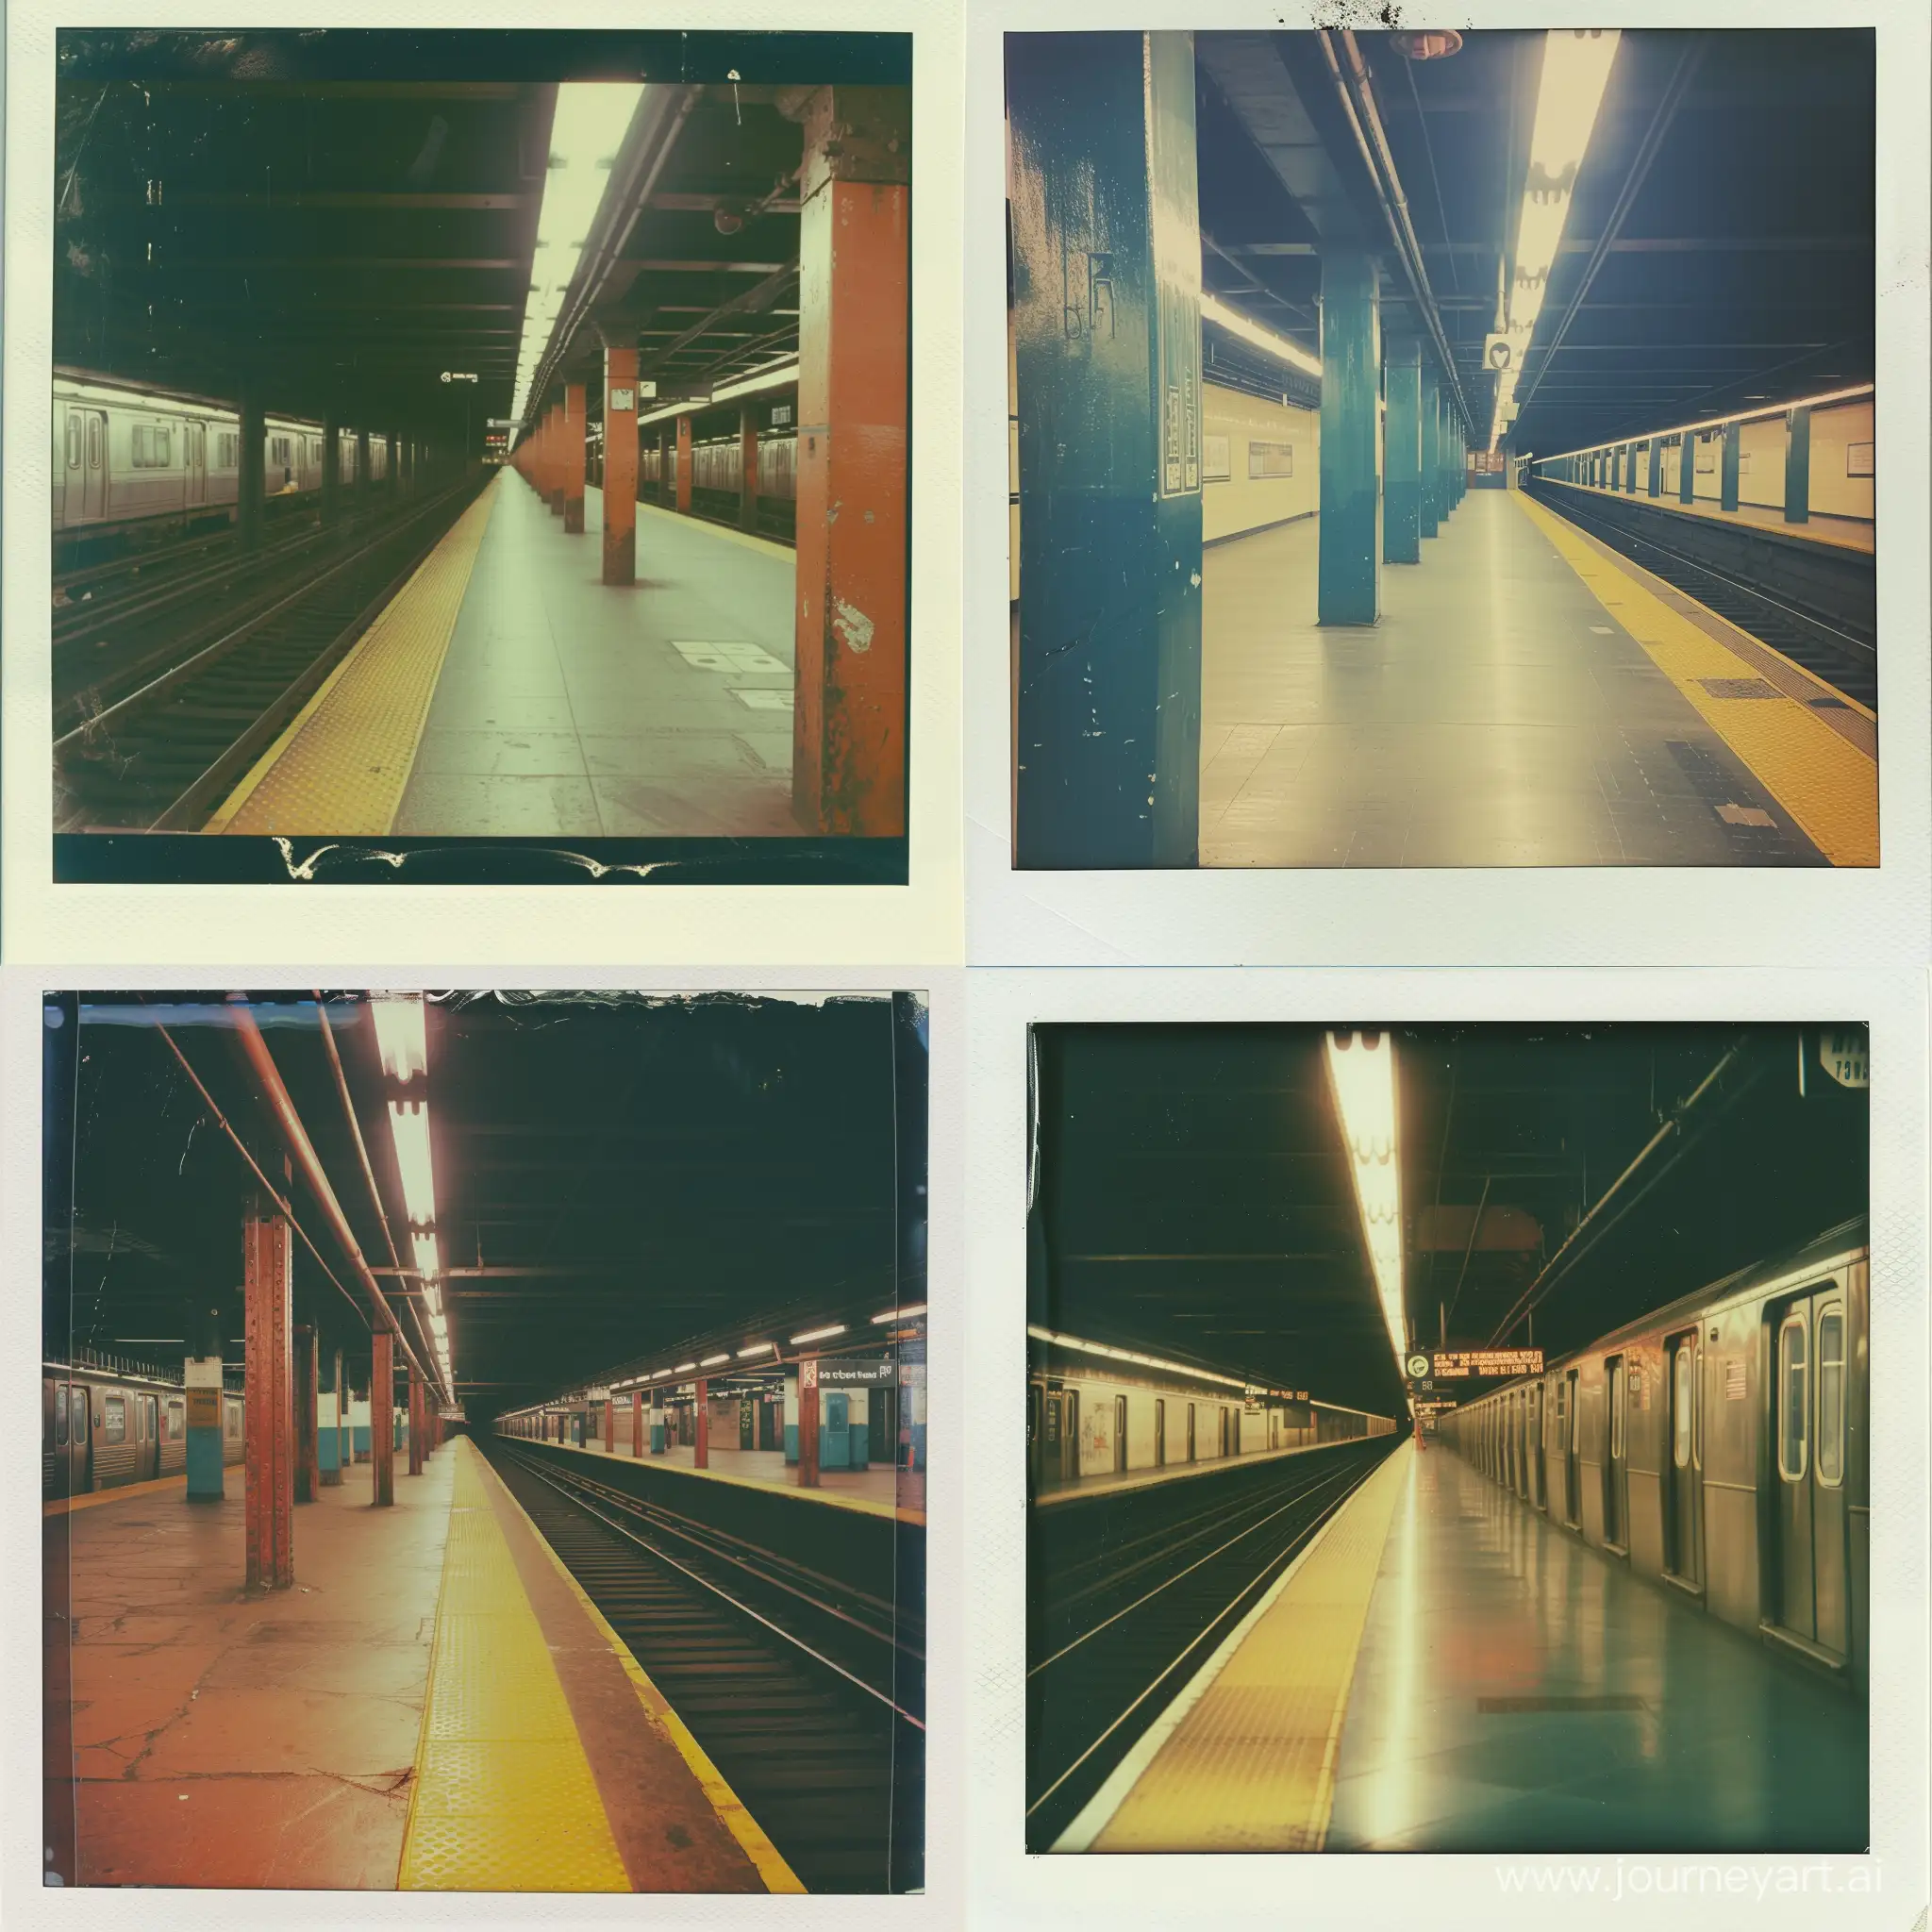 A polaroid style picture of an MTA subway station, early 2000s